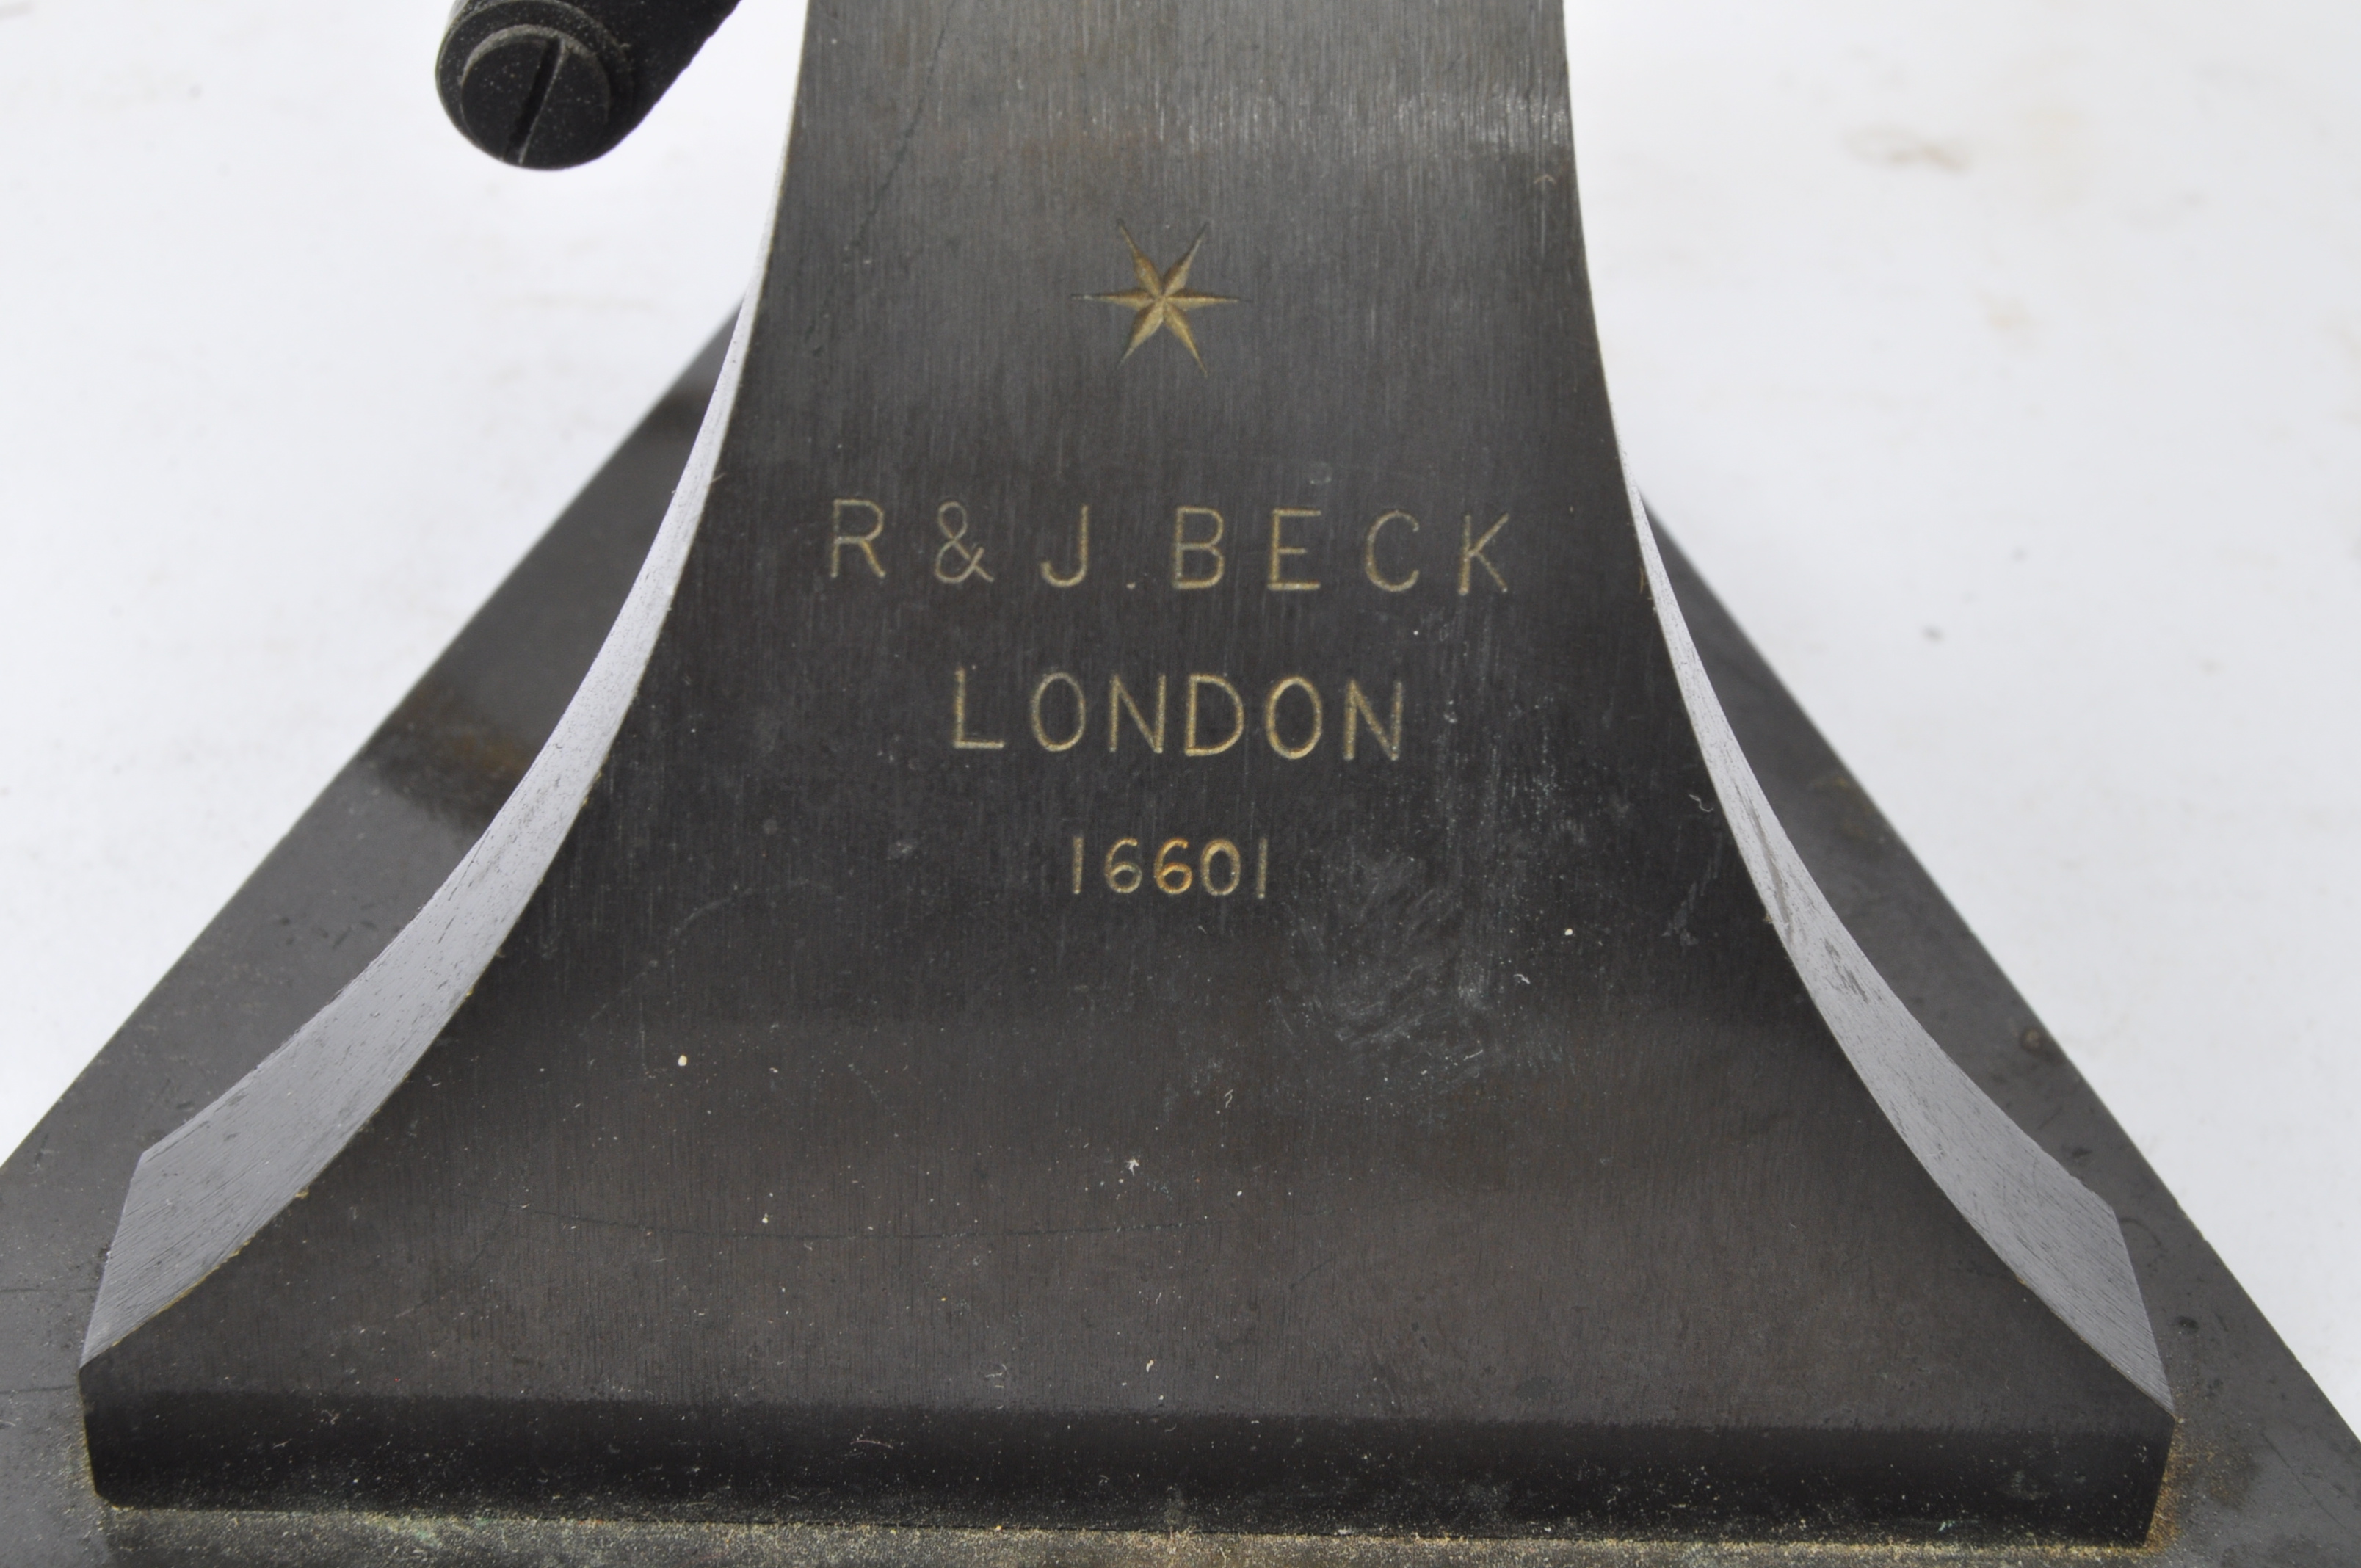 R & J BECK LONDON - EARLY 20TH CENTURY MICROSCOPE - Image 3 of 6